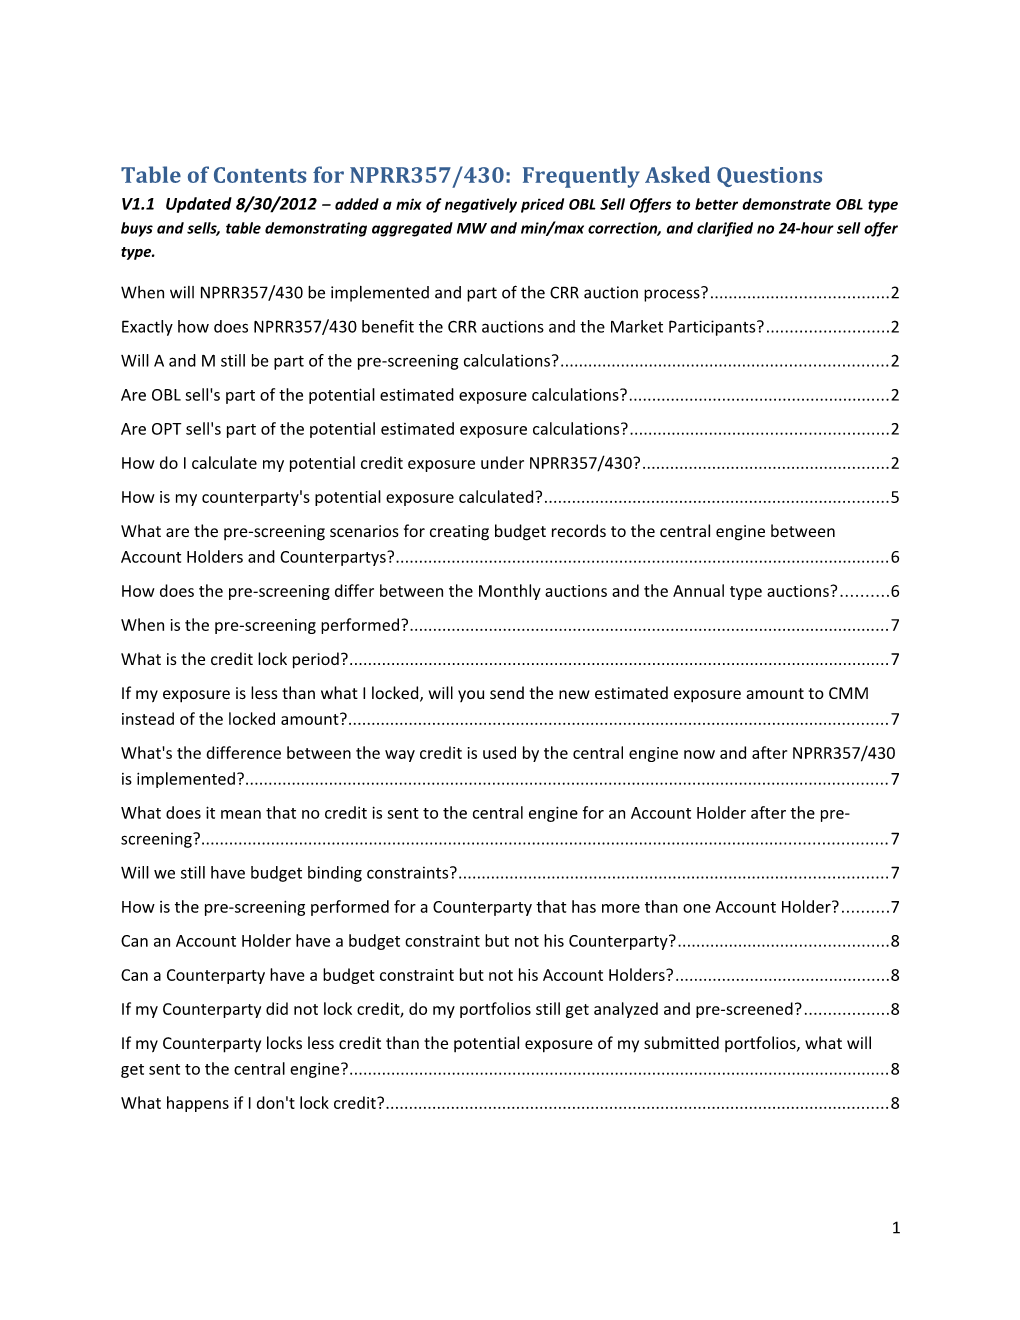 Table of Contents for NPRR357/430: Frequently Asked Questions